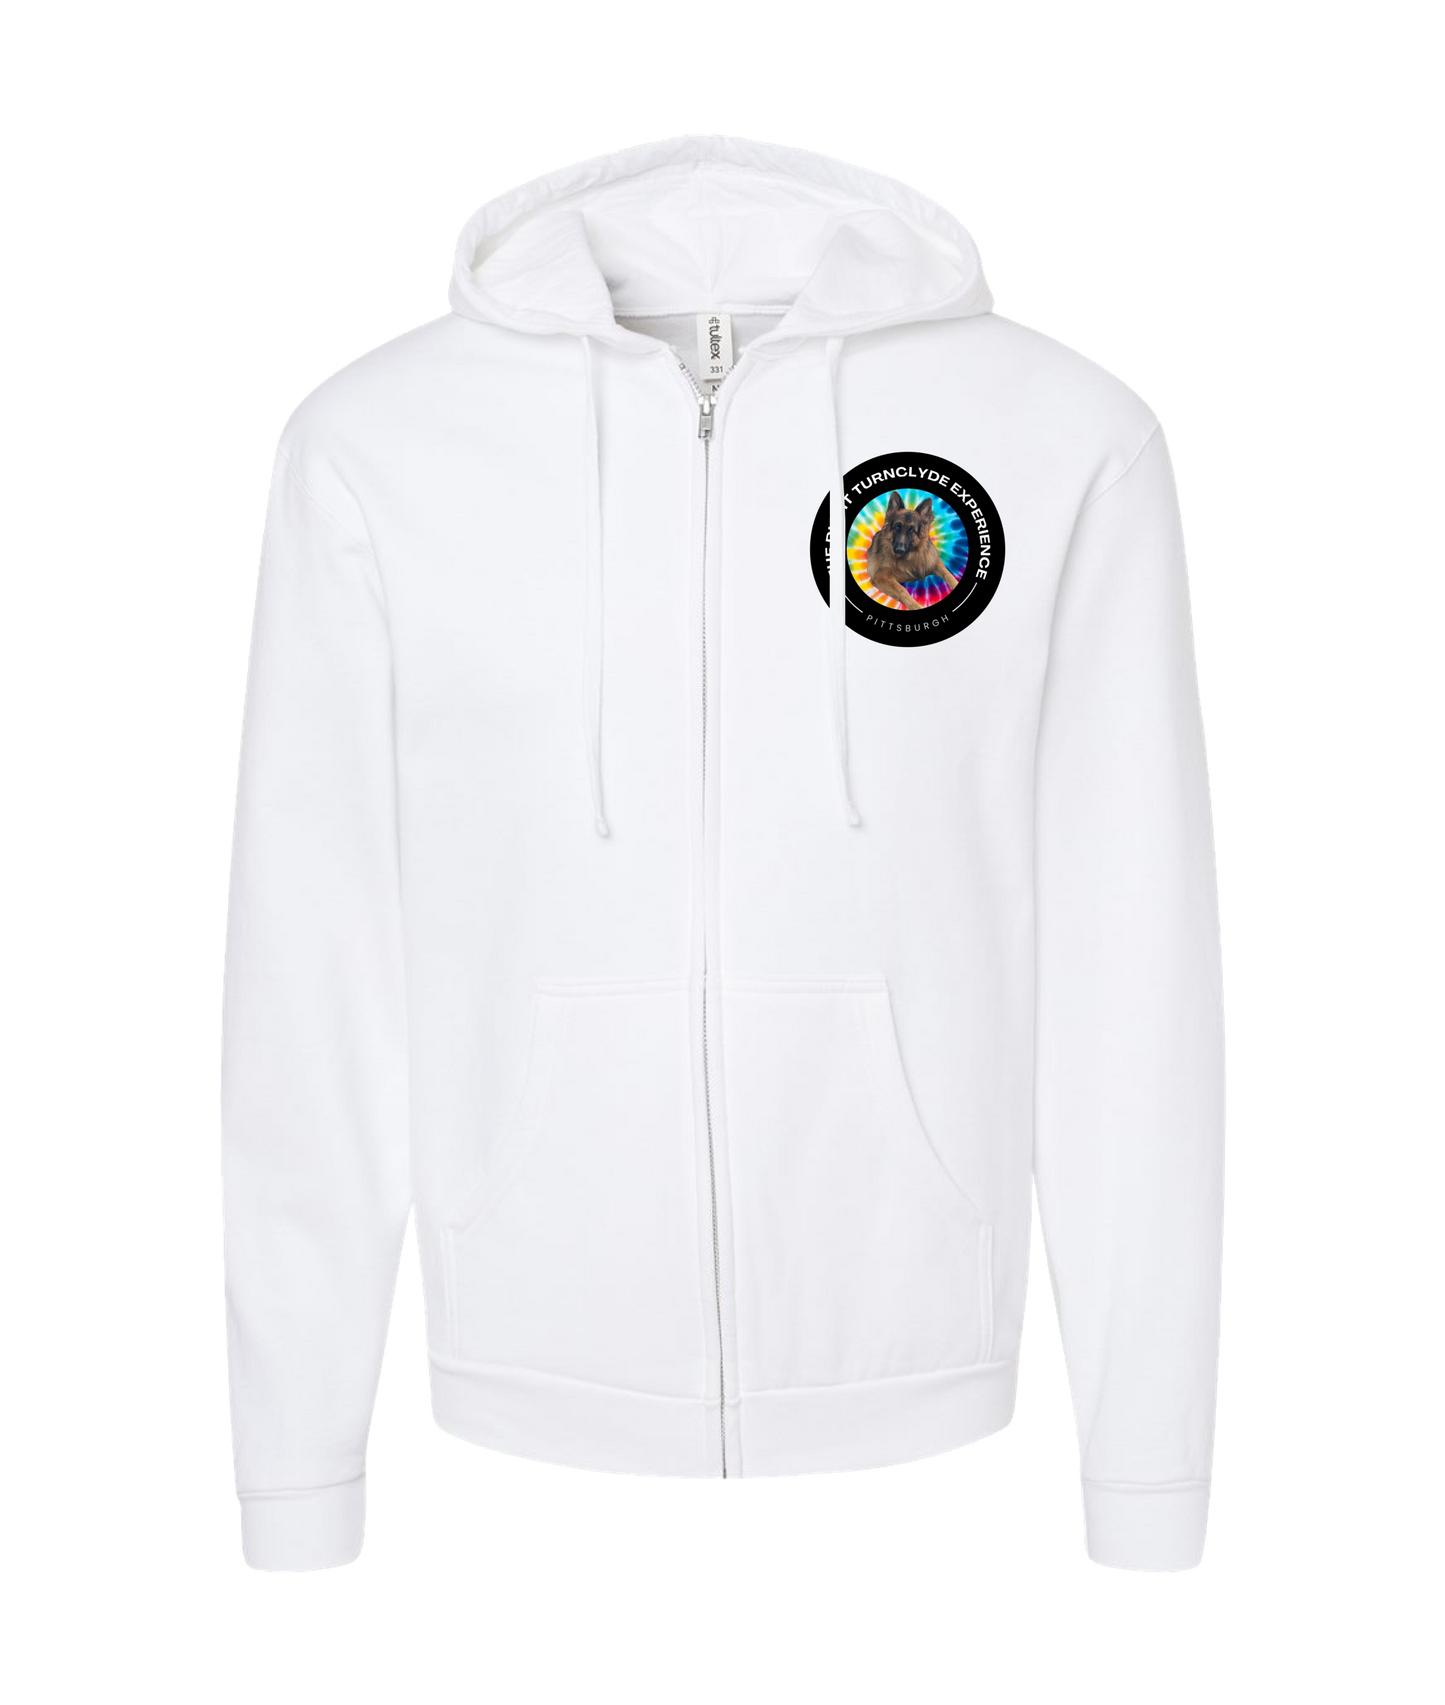 Right TurnClyde "Brucie Gear" Merchandise - Right TurnClyde "Brucie Gear" Merchandise - White Zip Up Hoodie